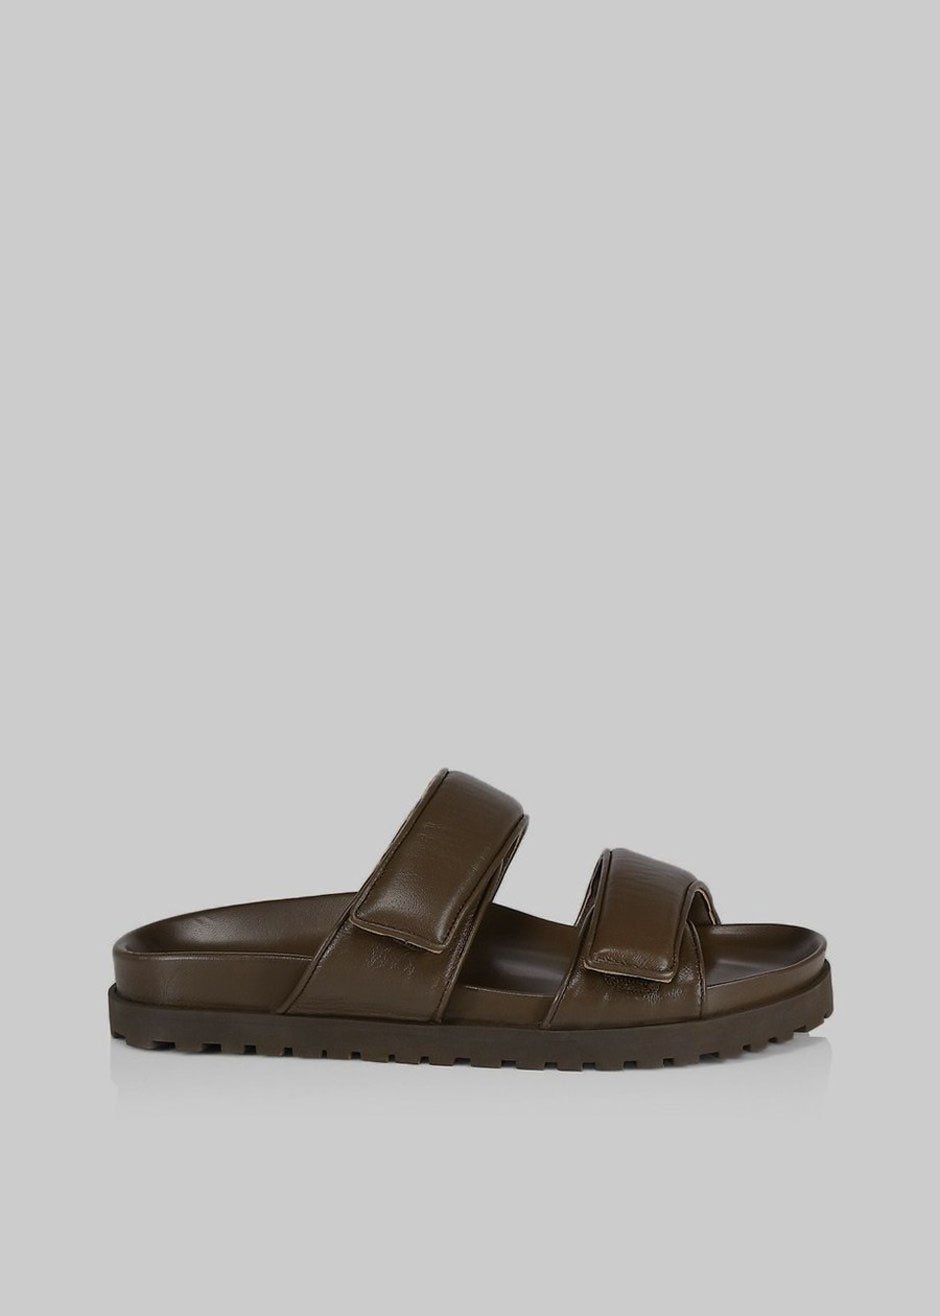 GIA x Pernille Leather Slide Sandals - Brown - 1